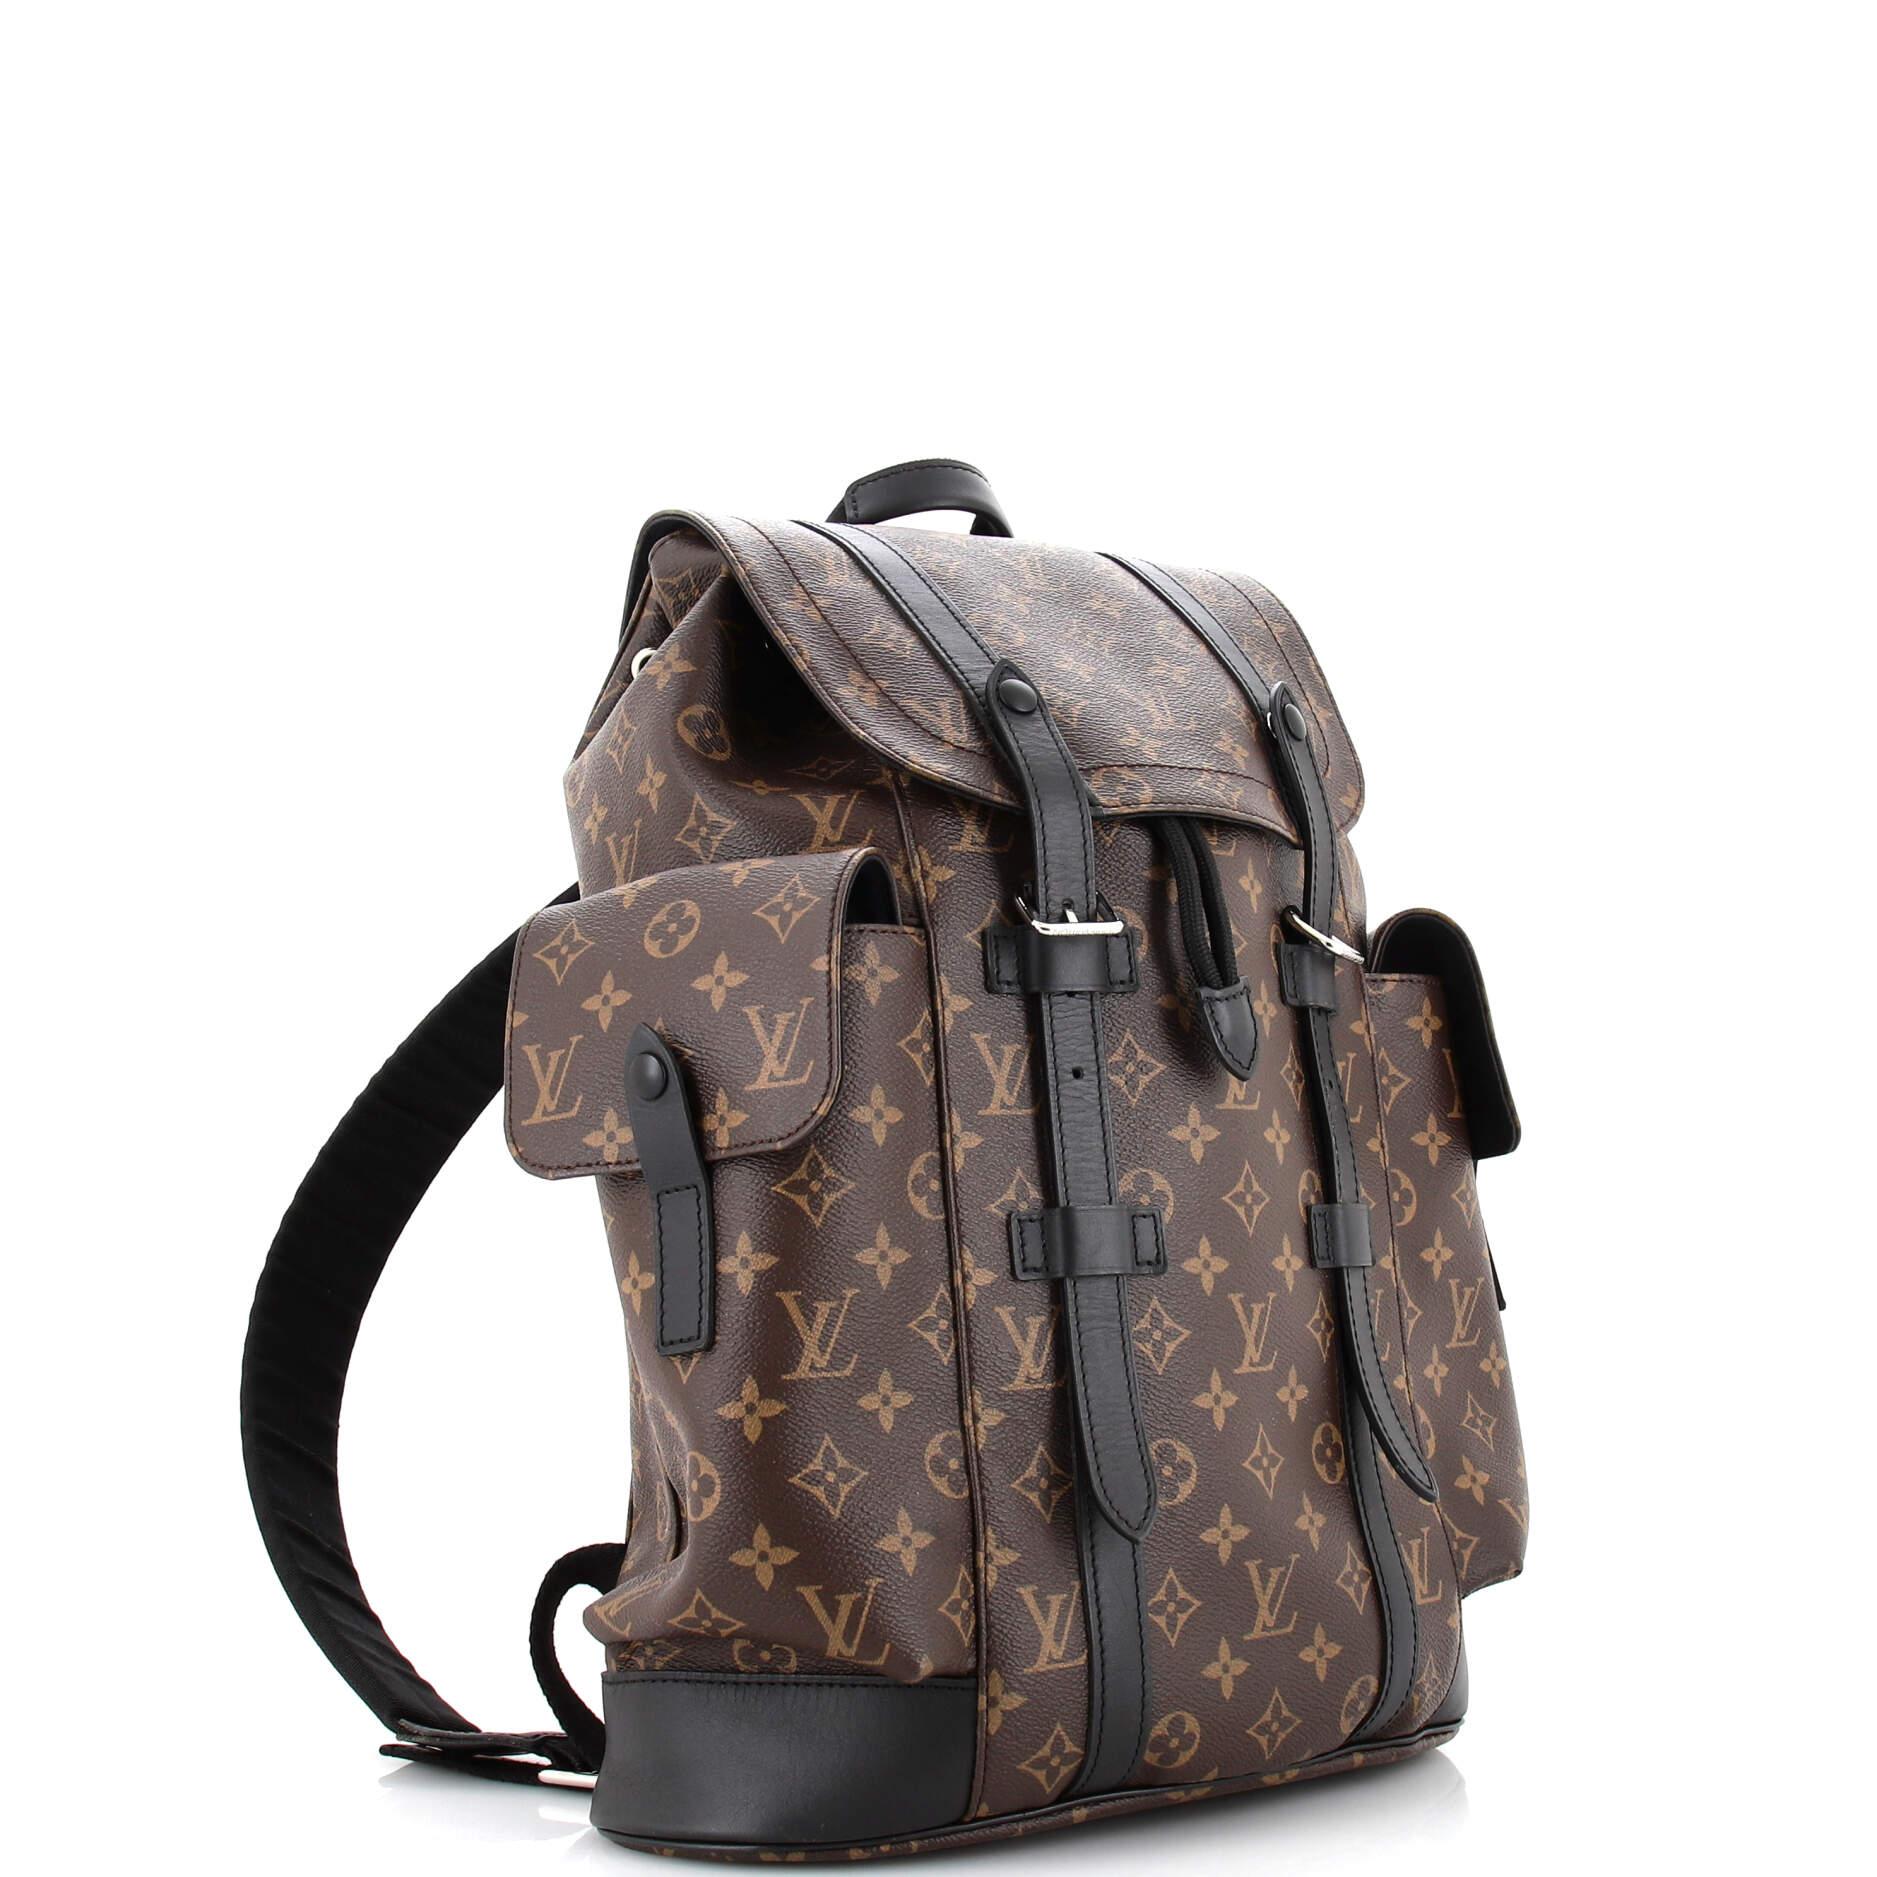 Christopher Pm Louis Vuitton - 4 For Sale on 1stDibs